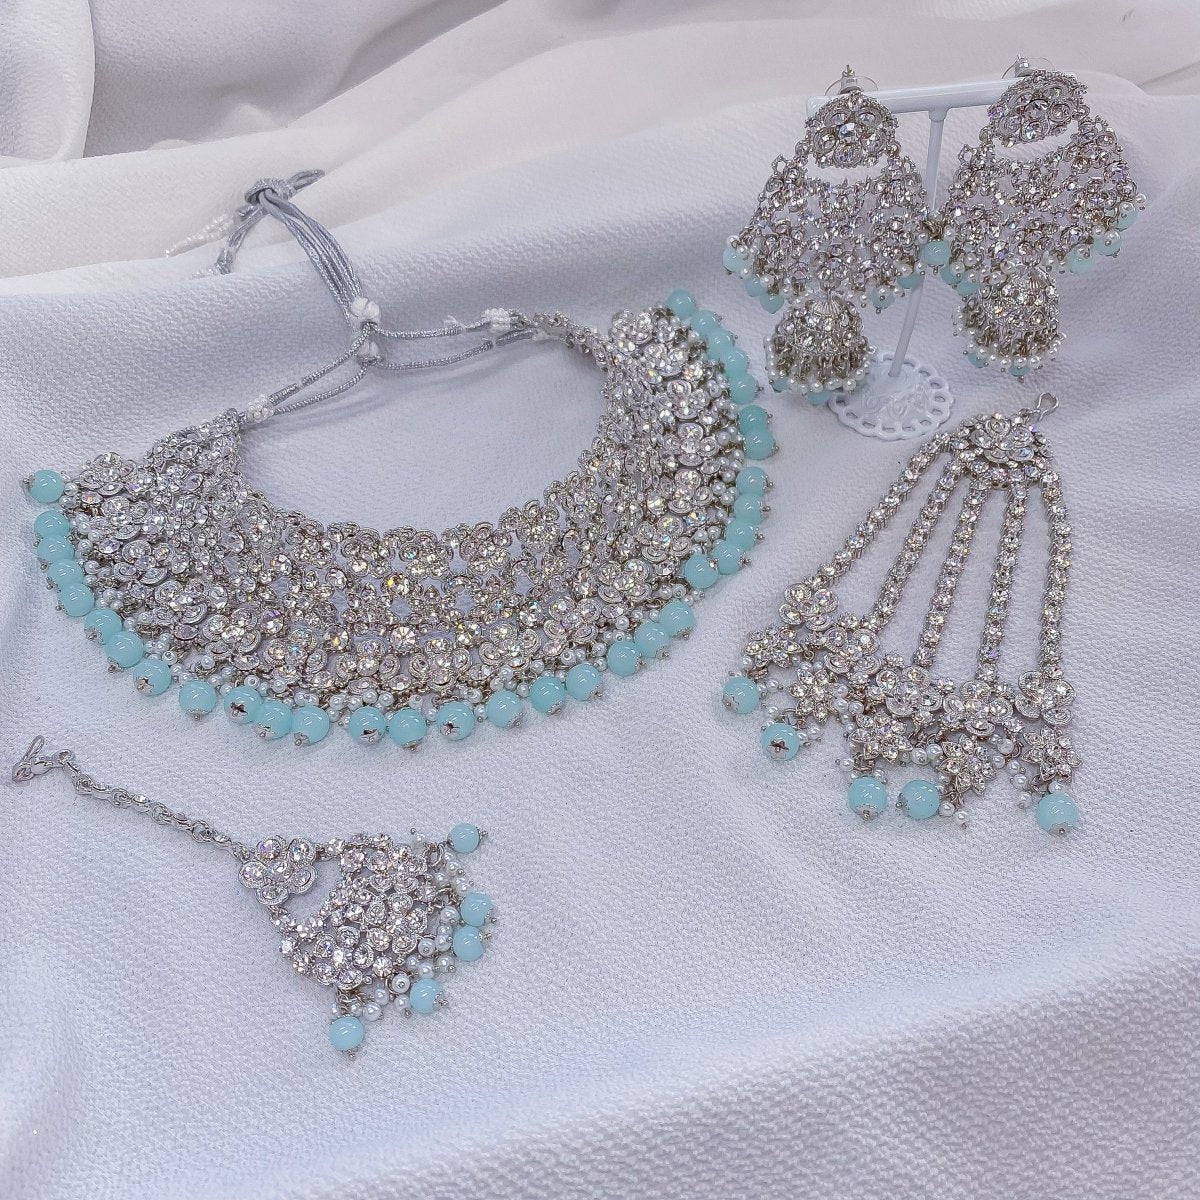 Turquoise Blue Beads & Genuine Stones Contemporary Jewelry Set of Necklace,  Bracelet & Earrings